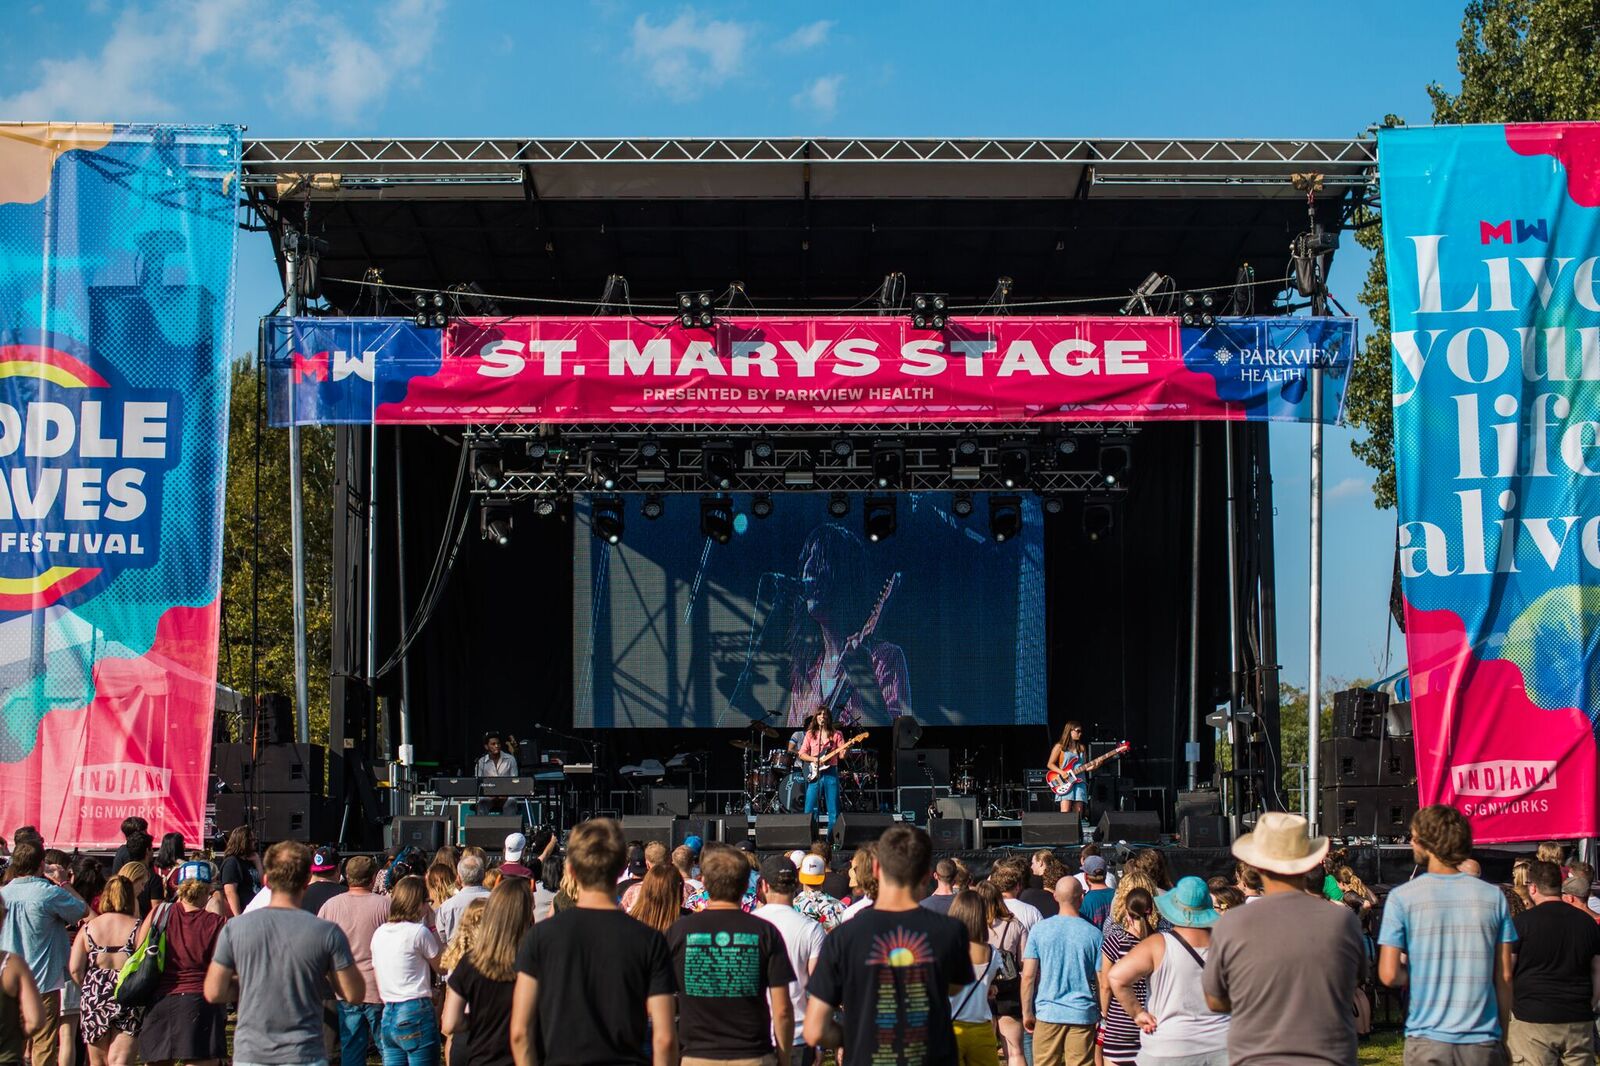 Middle Waves is a two day, three stage music festival in Fort Wayne.